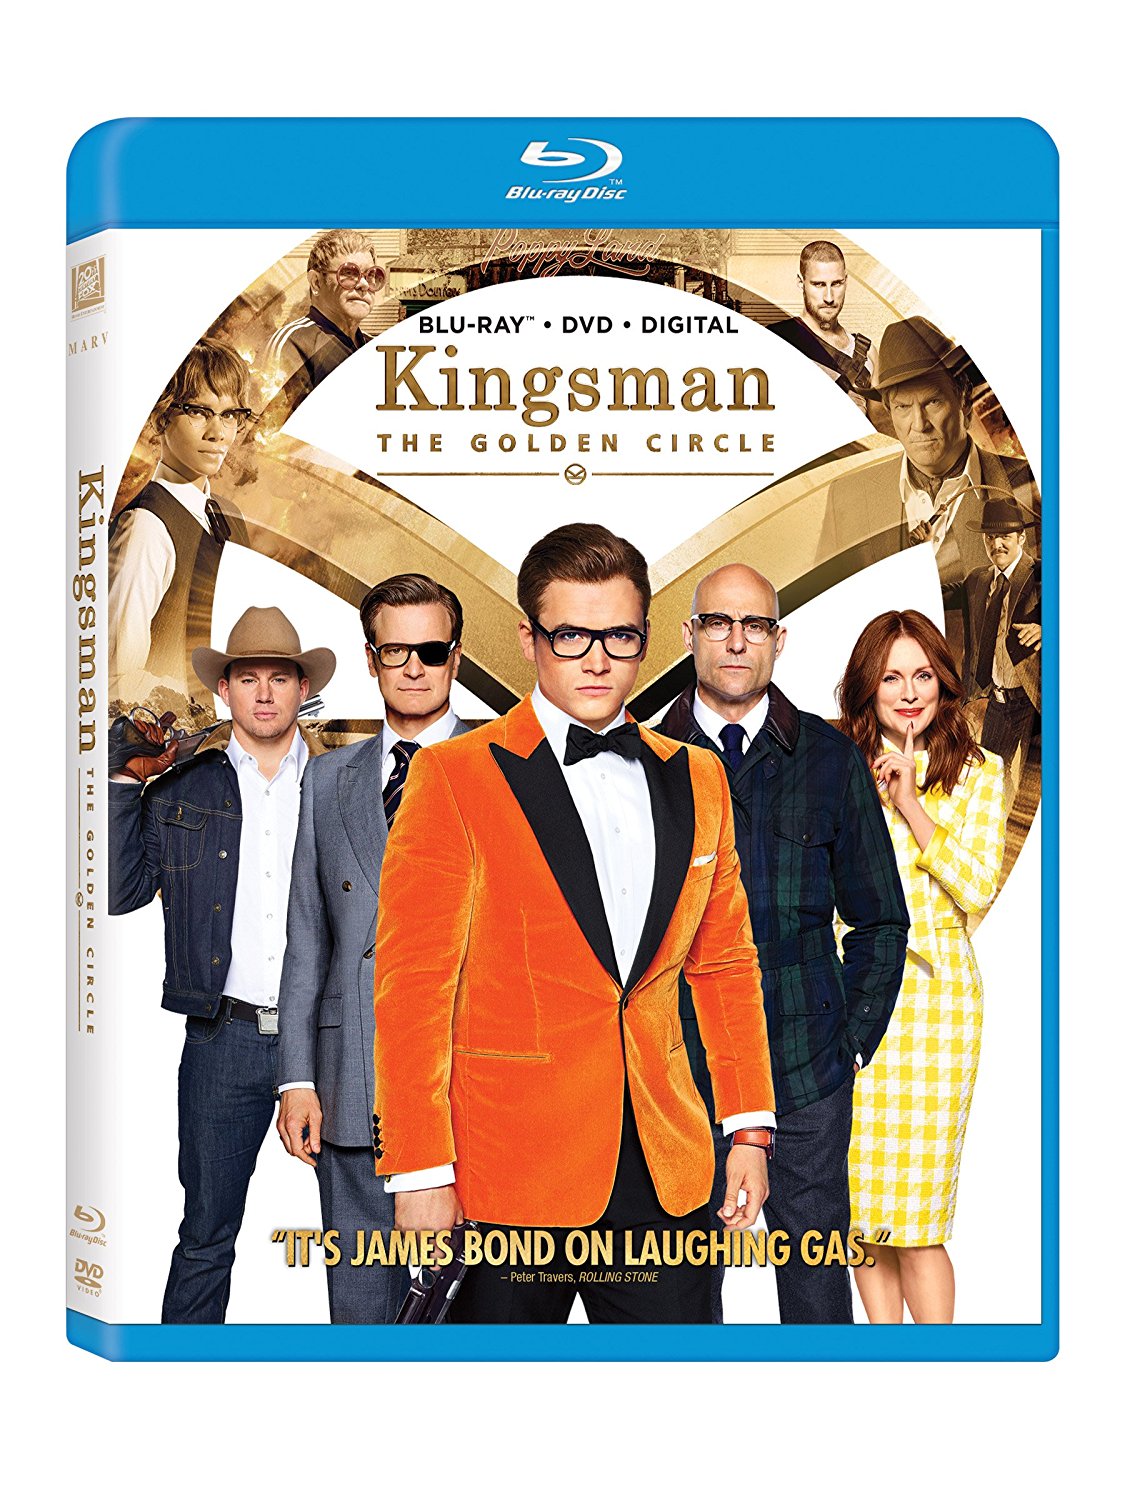 New on DVD and Blu-ray: KINGSMAN - THE GOLDEN CIRCLE (2017) | The ...